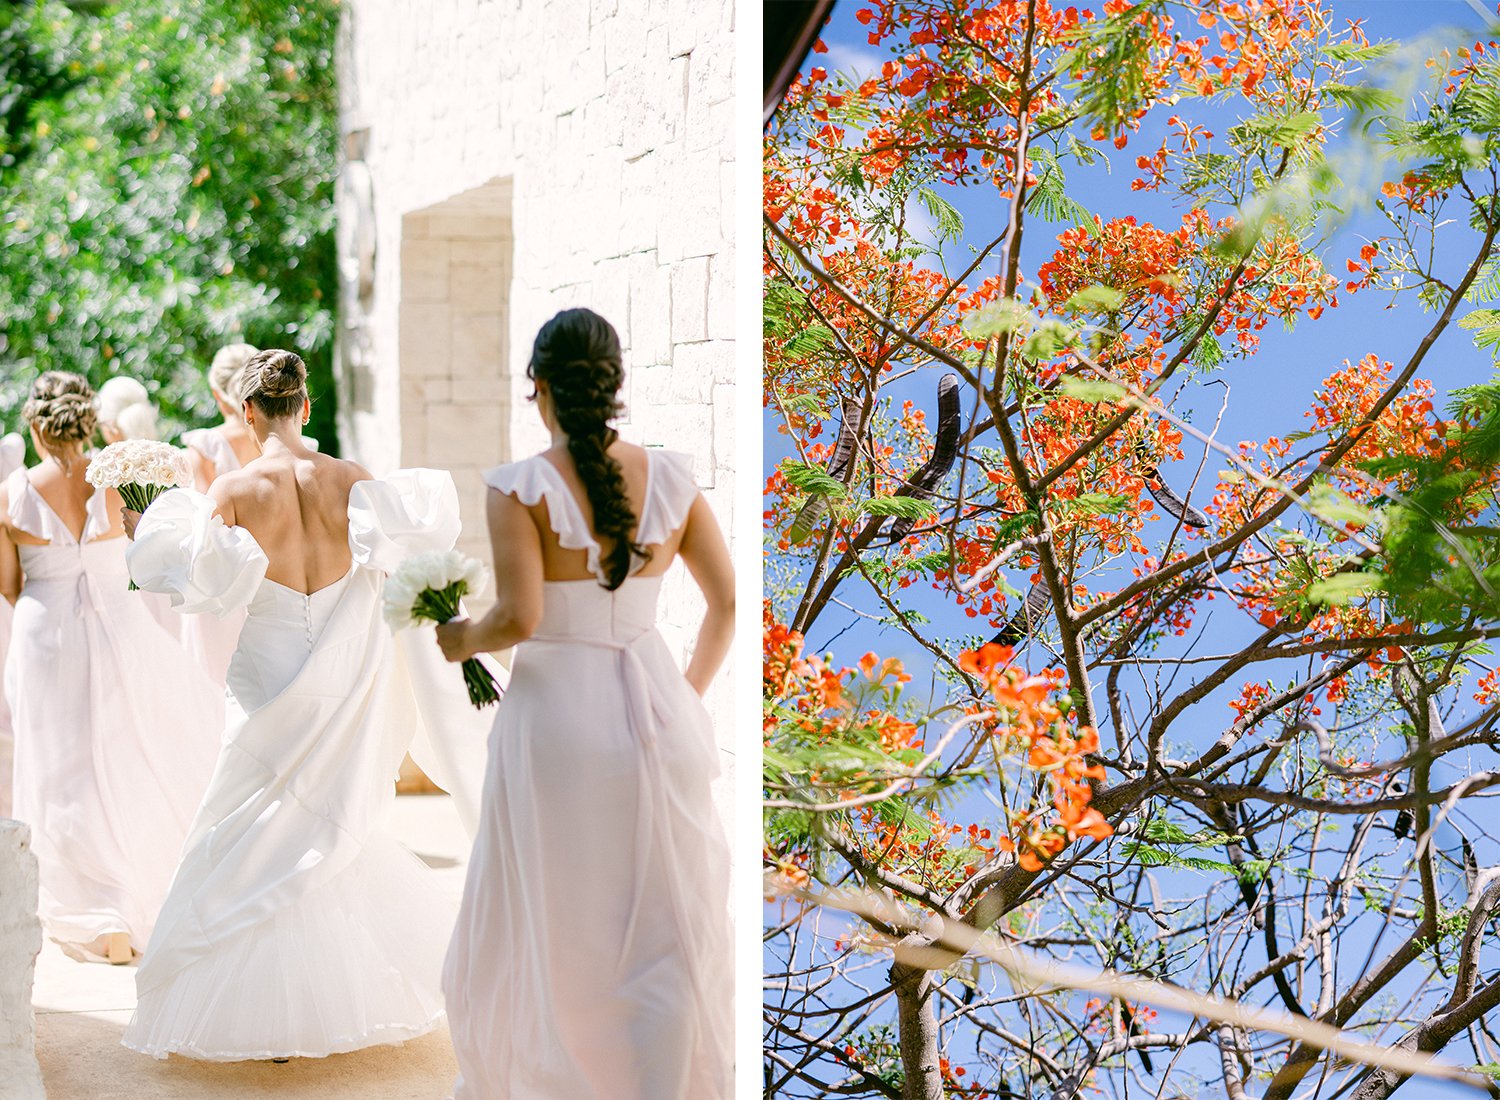 23 bride in white wedding dress walking with bridesmaids and nature detail photo of trees with orange flowers above bride and groom first look before their wedding at Dreams Riviera Cancun.JPG